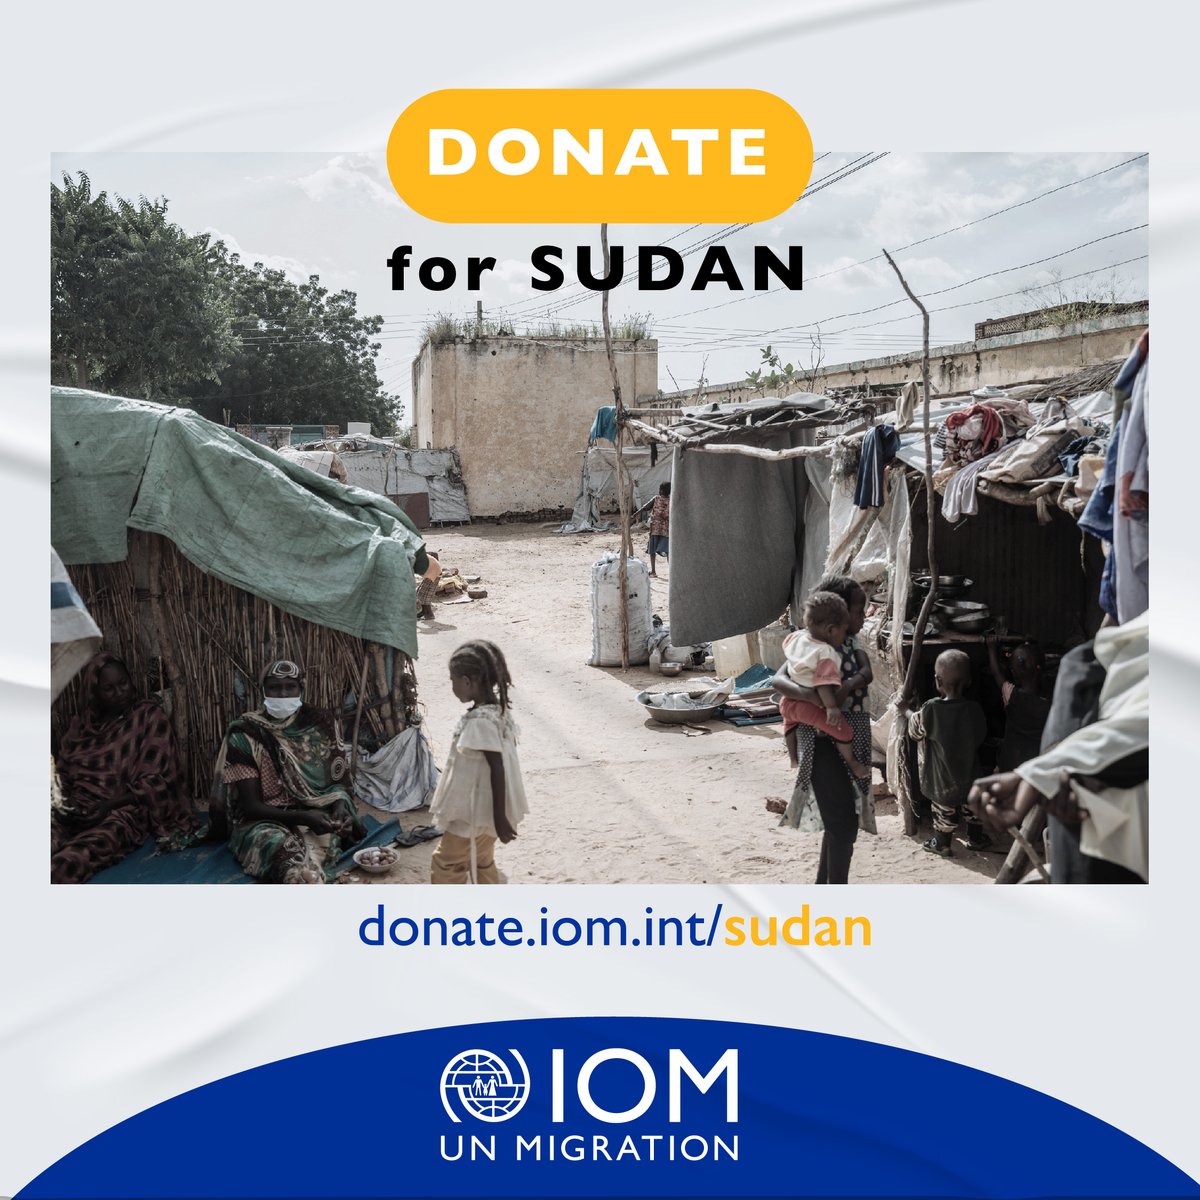 6 months into the #SudanCrisis 🇸🇩, needs continue to skyrocket. The people of #Sudan and neighboring countries still need our support. We are not leaving Sudan behind. You can help too! Donate now➡️ donate.iom.int/sudan #SudanStillCalling📢